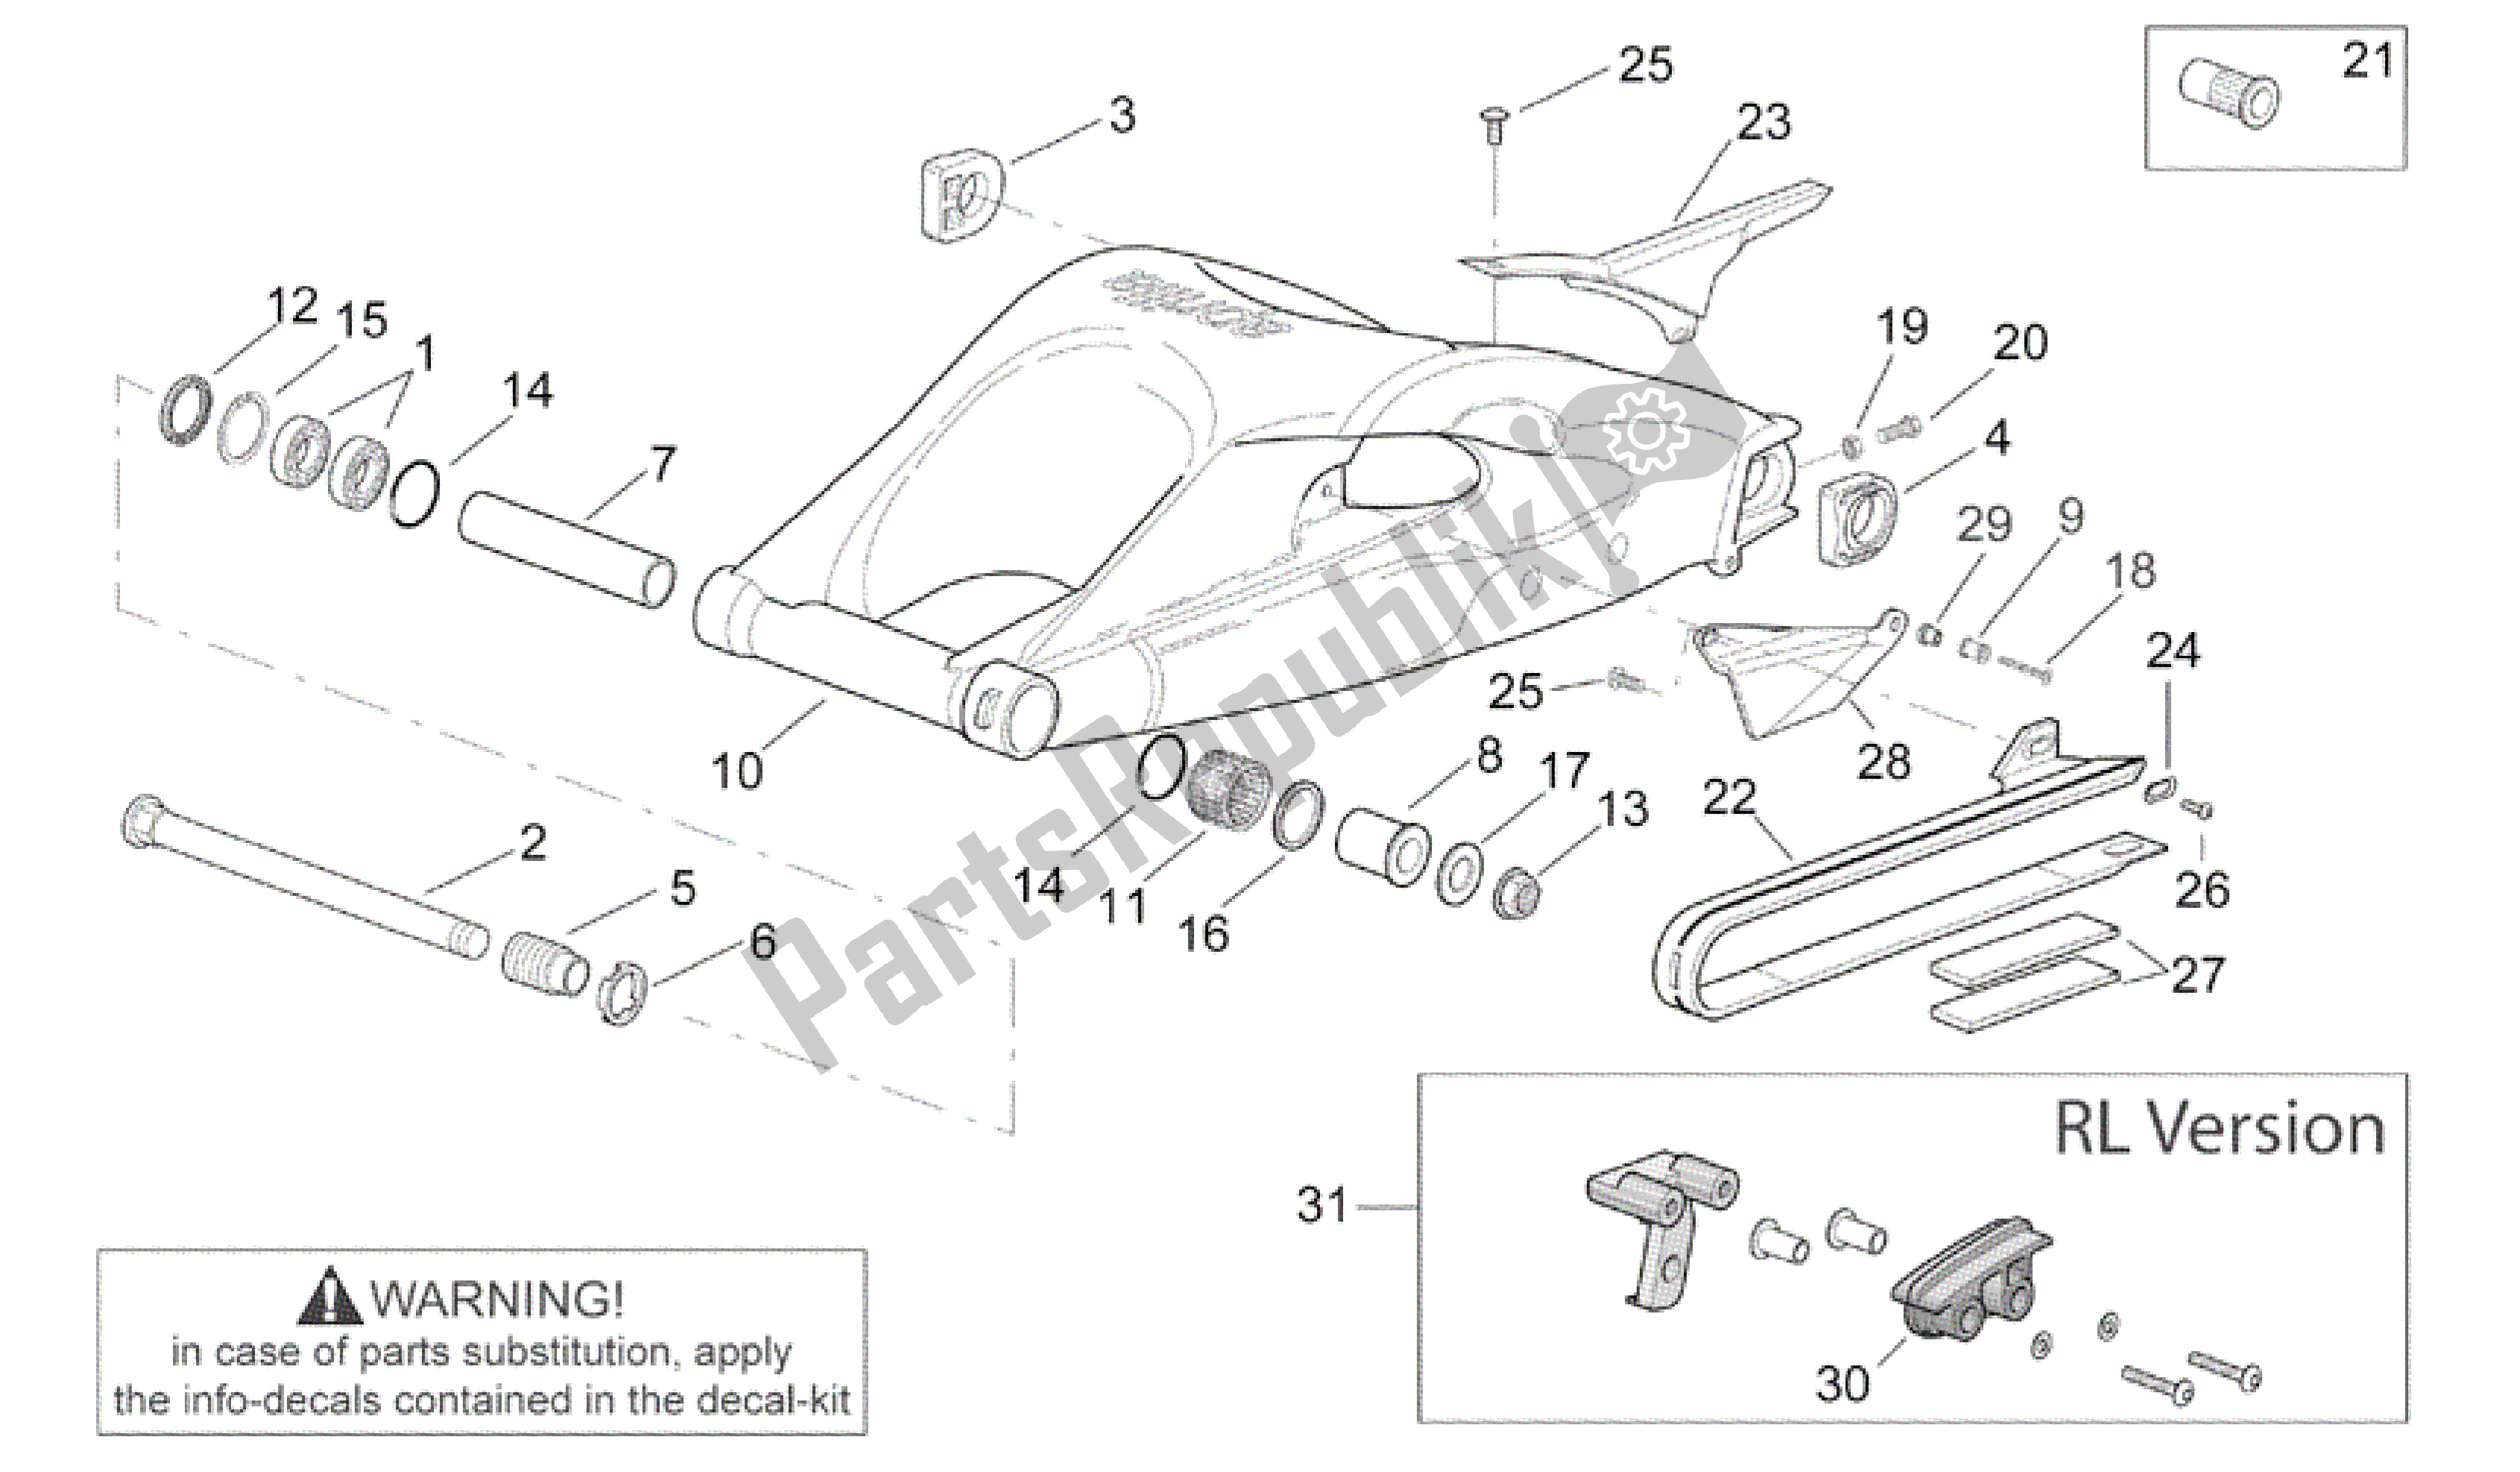 All parts for the Swing Arm of the Aprilia RSV Mille 3963 1000 2003